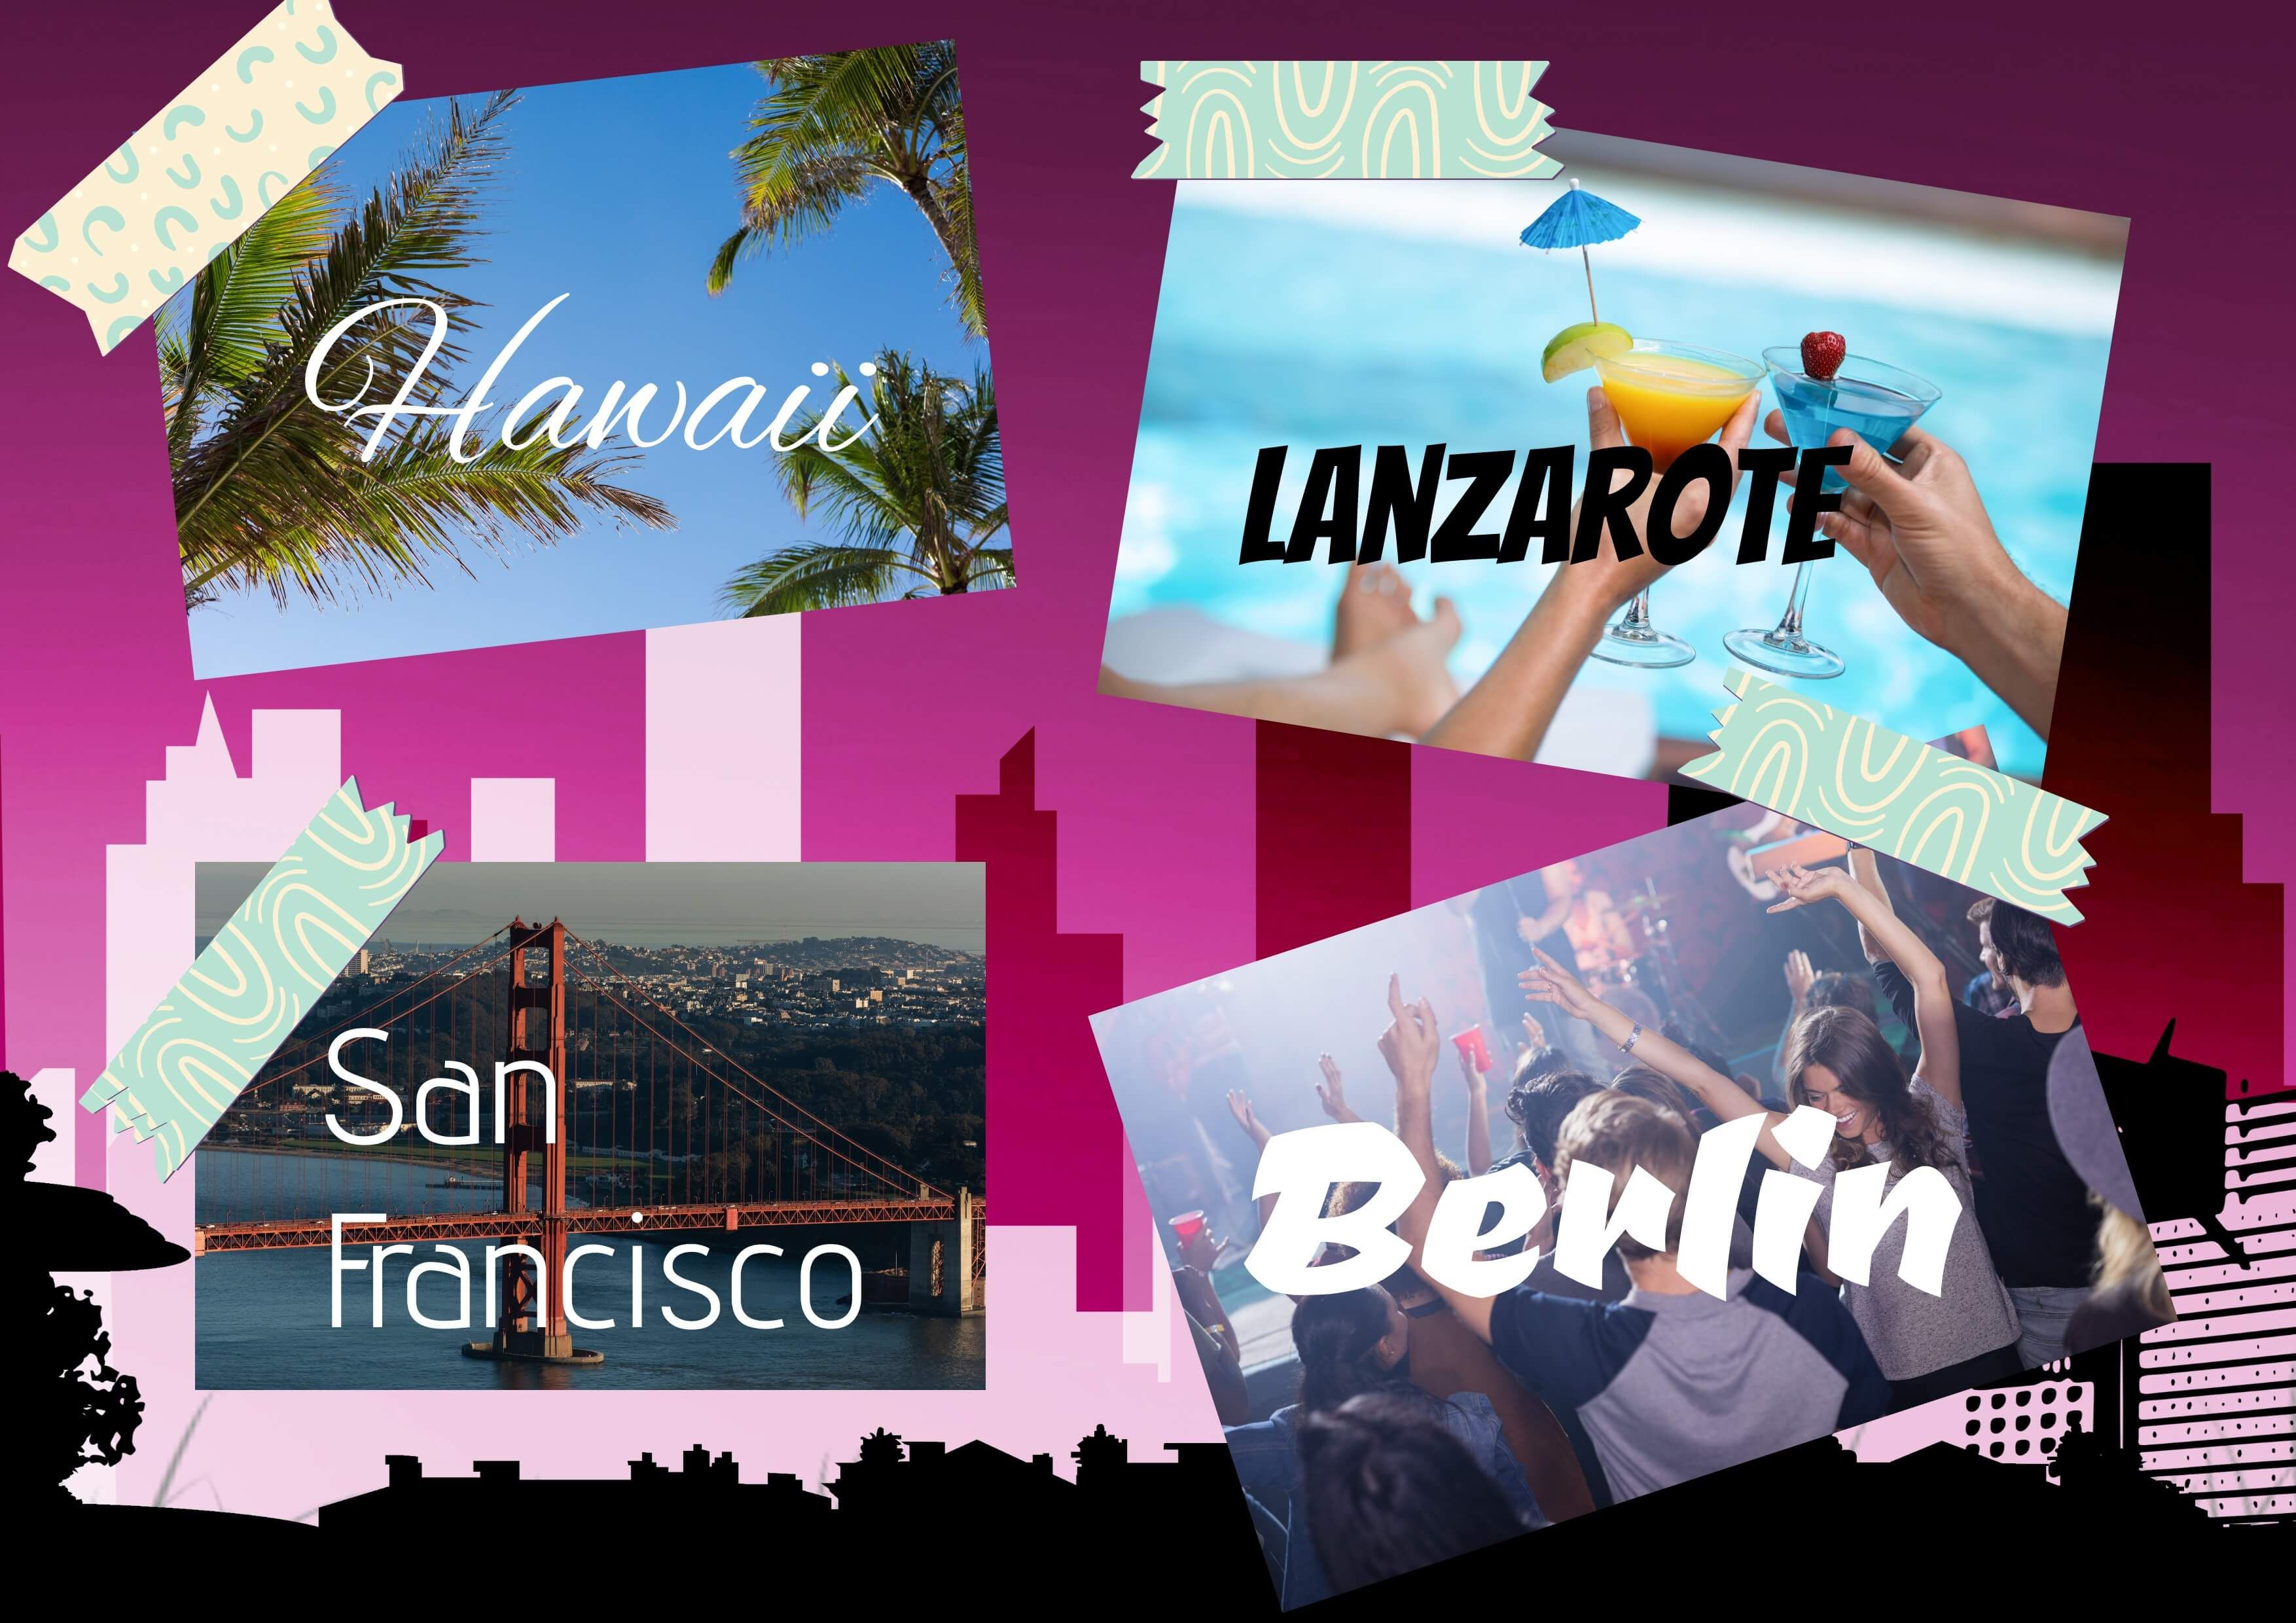 Bucket List Collage with Images and Text Referring to 'Hawaii', 'Lanzarote' 'San Francisco' and 'Berlin' - How to make a collage: A complete inspirational guide with examples - Image